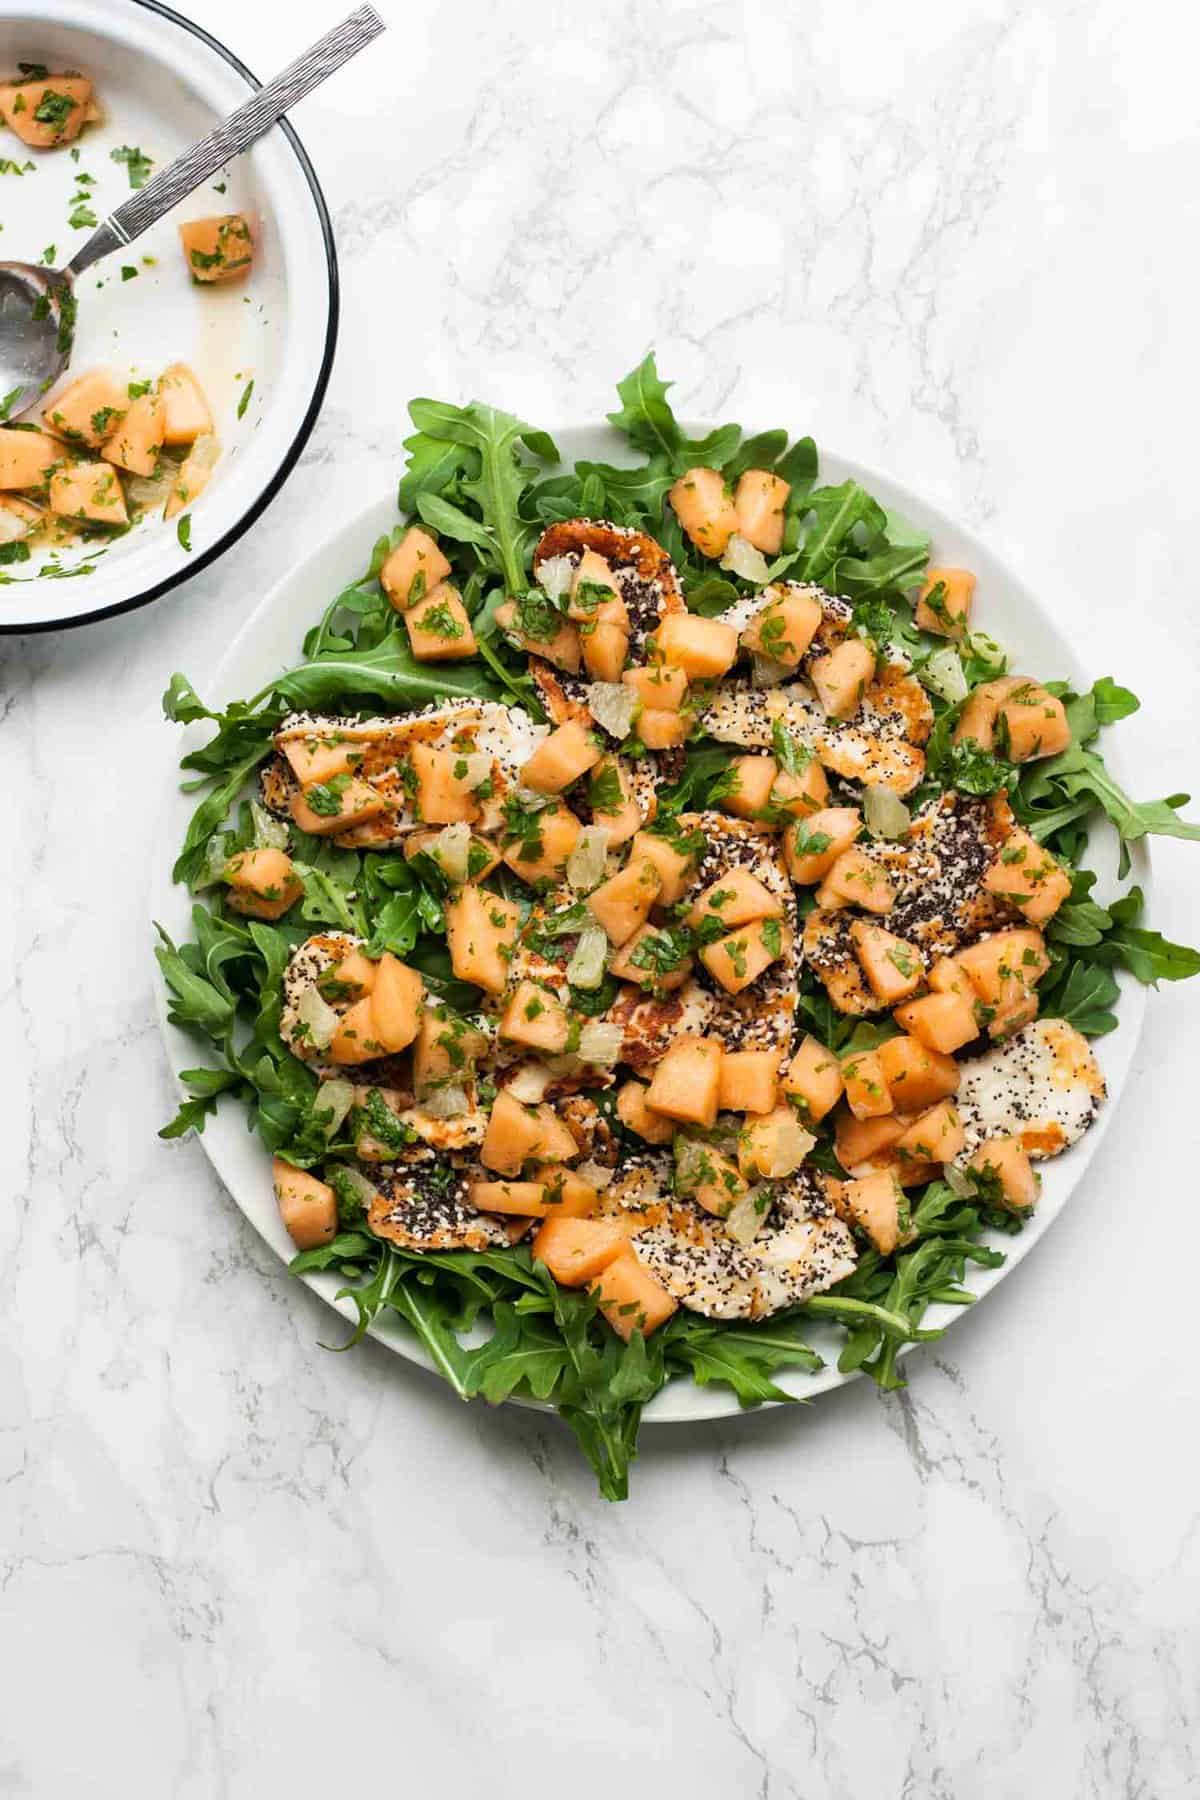 Cantaloupe, Lime and Halloumi Salad - a quick and simple appetizer/lunch recipe that is perfect for summer! | eatloveeats.com